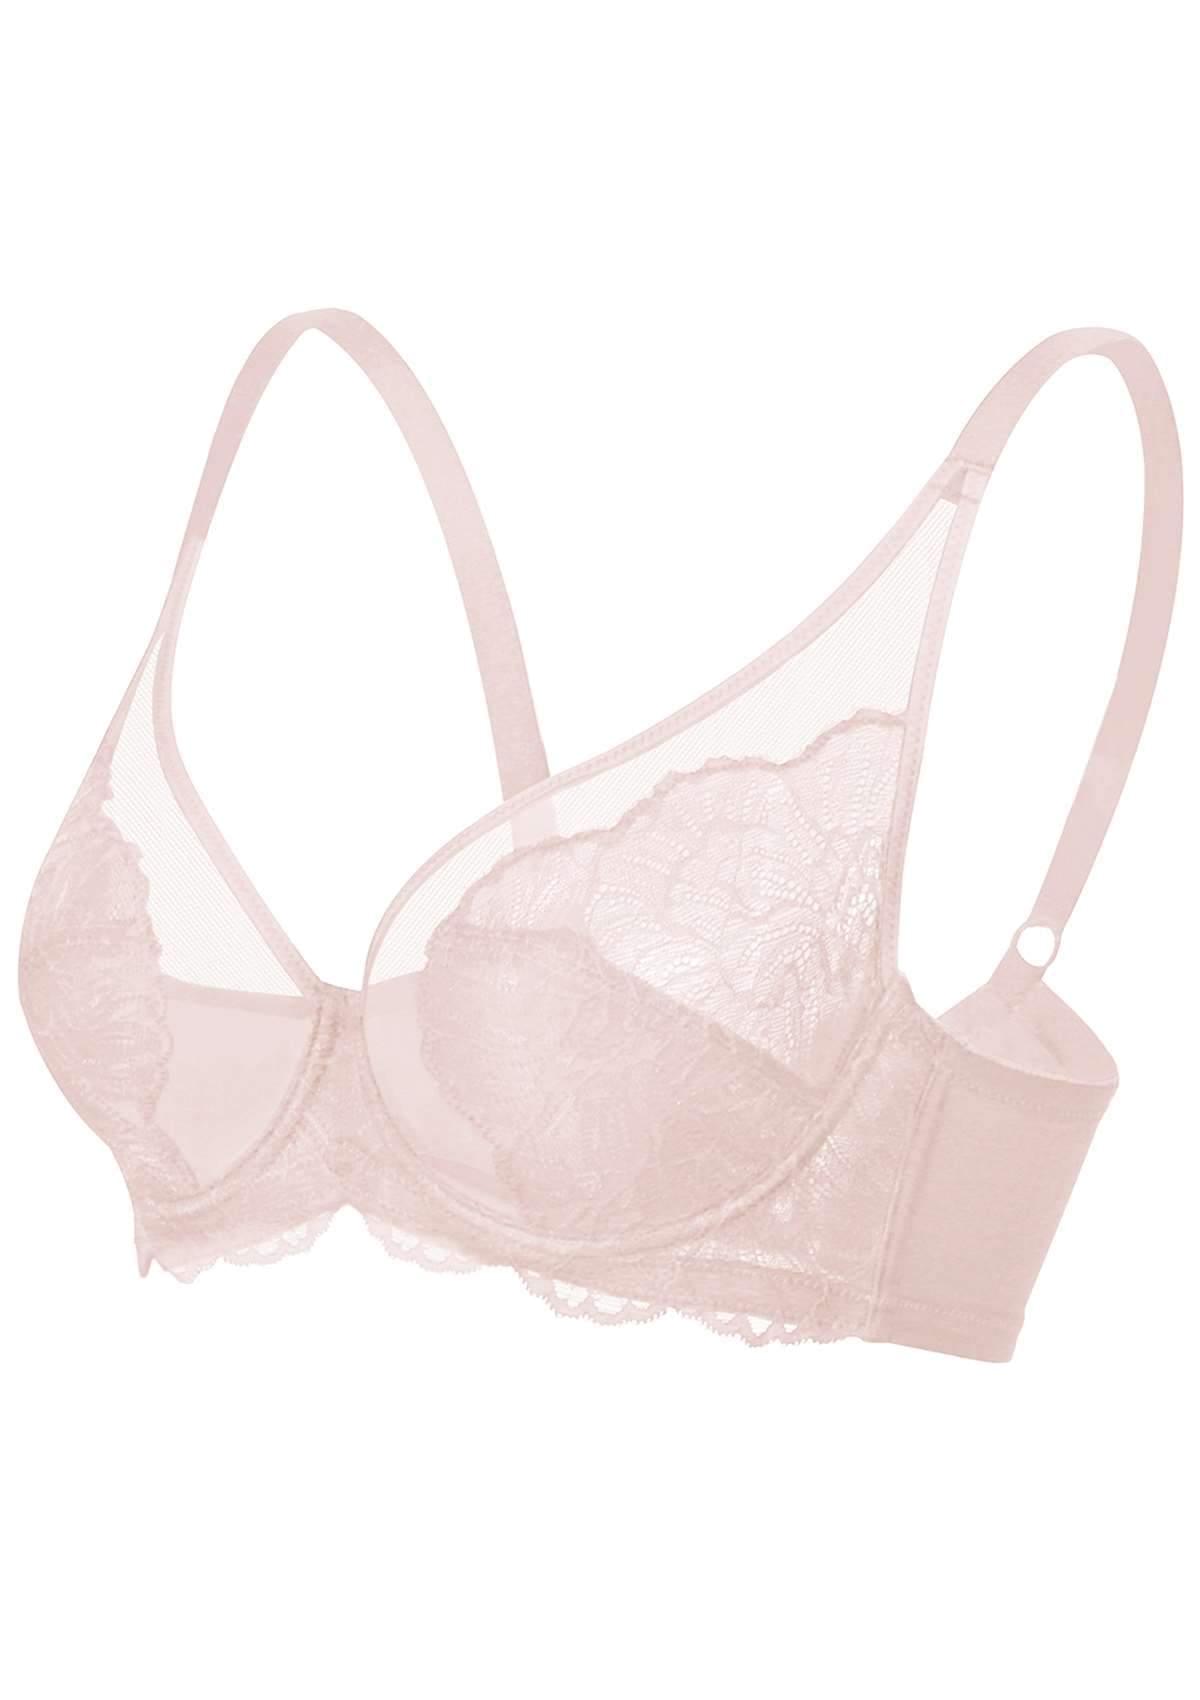 HSIA Blossom Lace Bra And Panties Set: Best Bra For Large Busts - Dark Pink / 46 / D